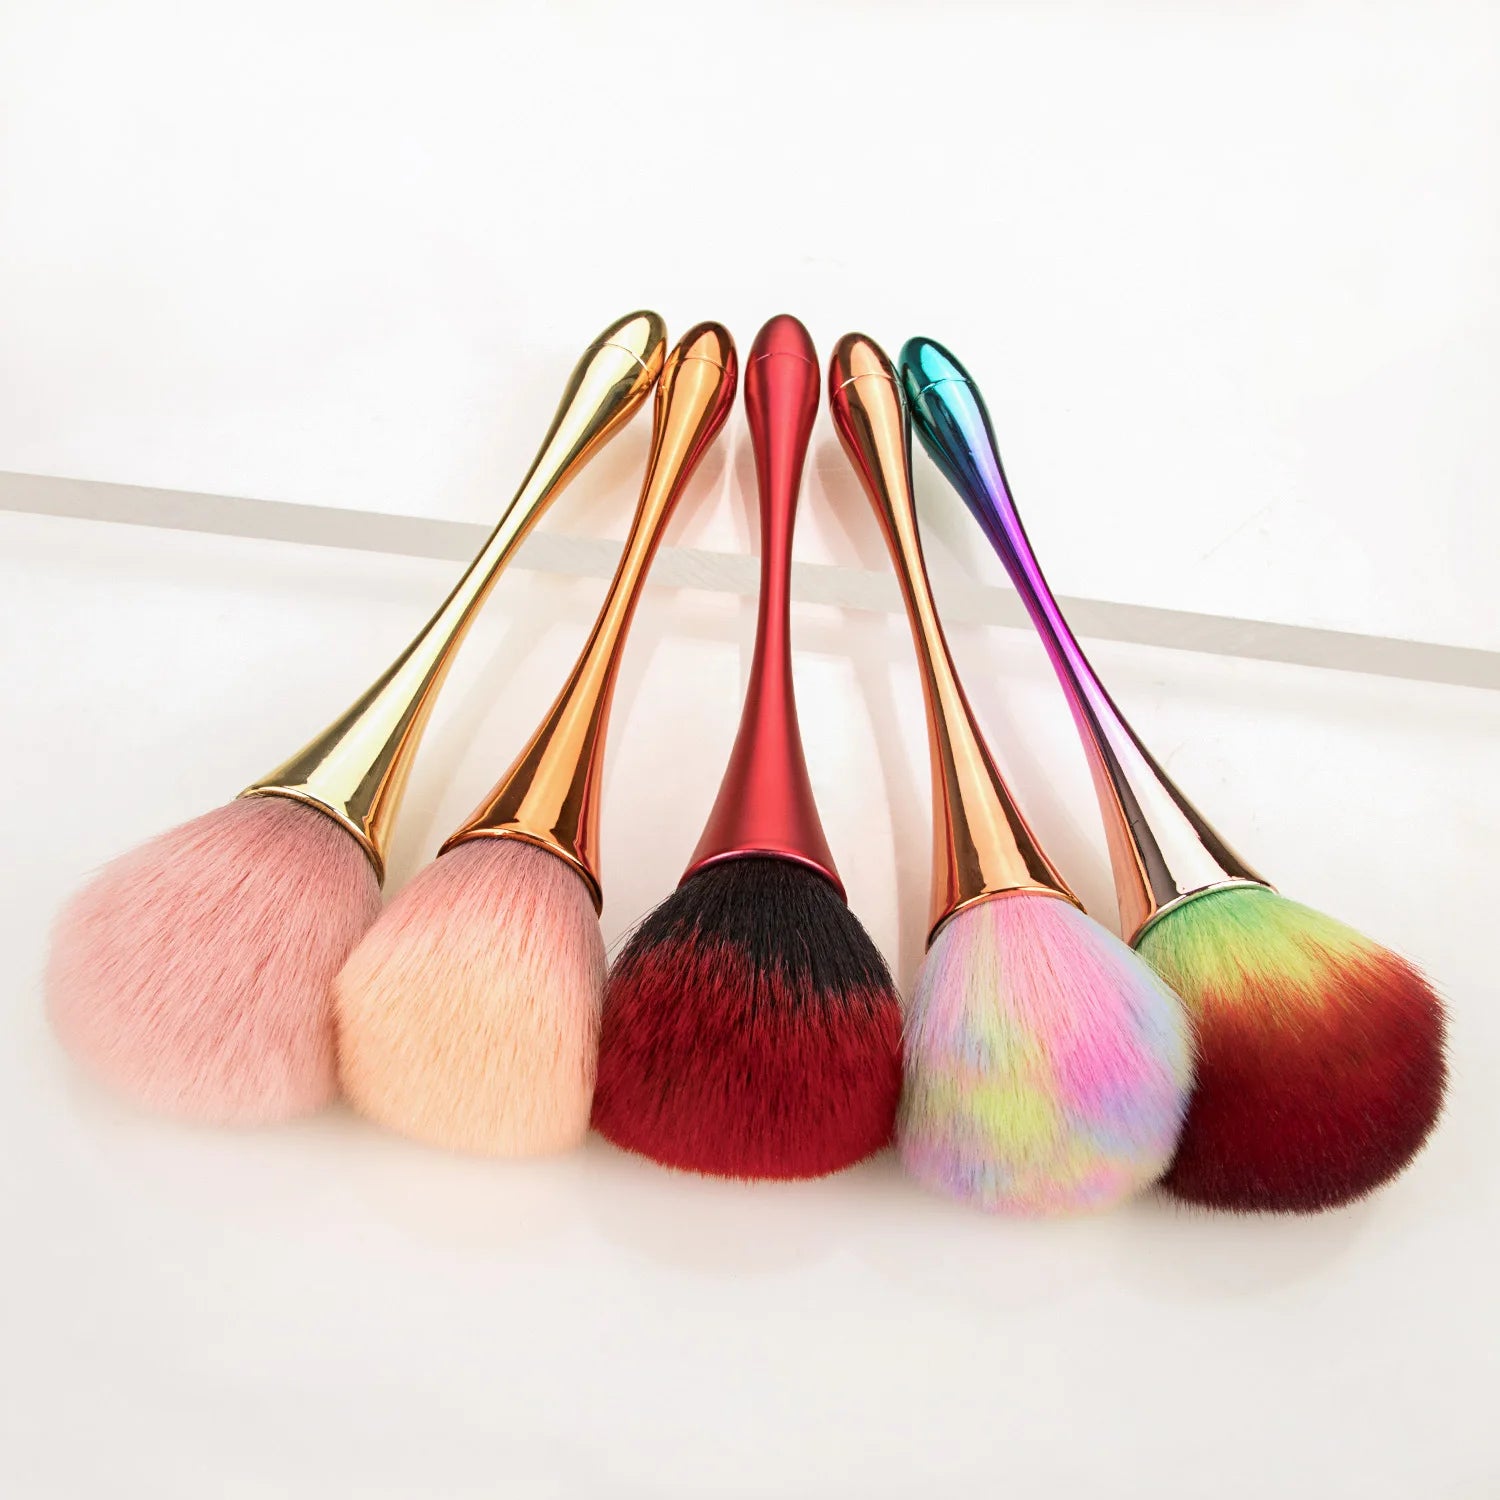 Rose Gold Beauty Brush Set: Premium Quality for Flawless Makeup Application